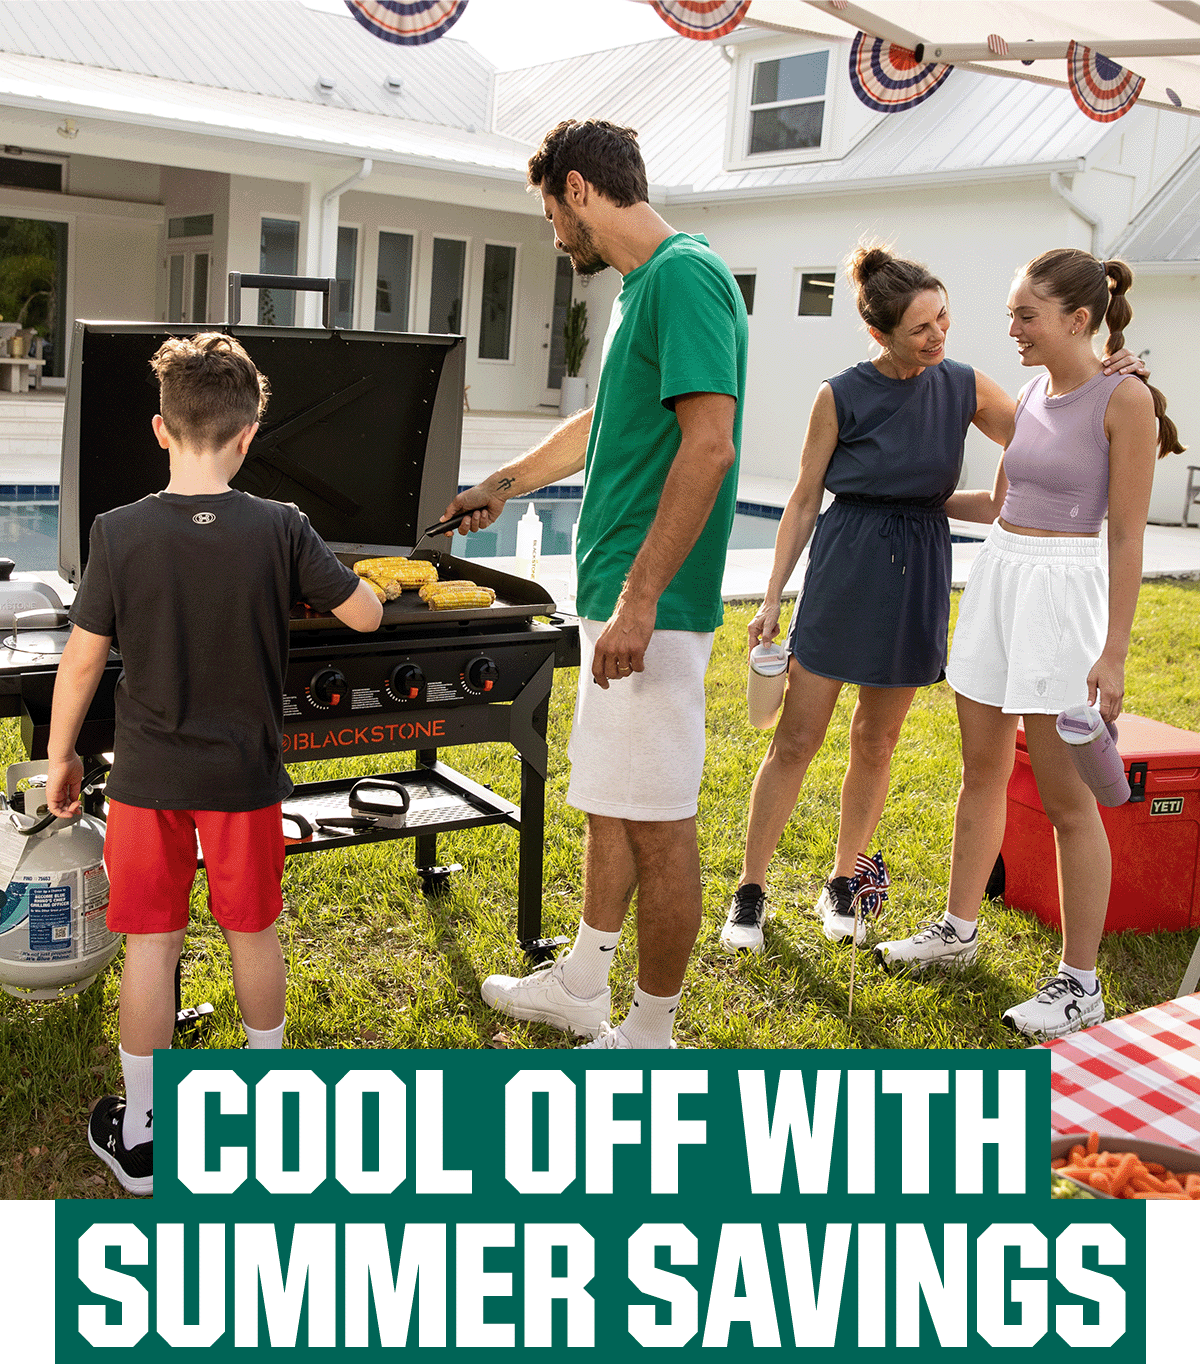  Cool off with summer savings.